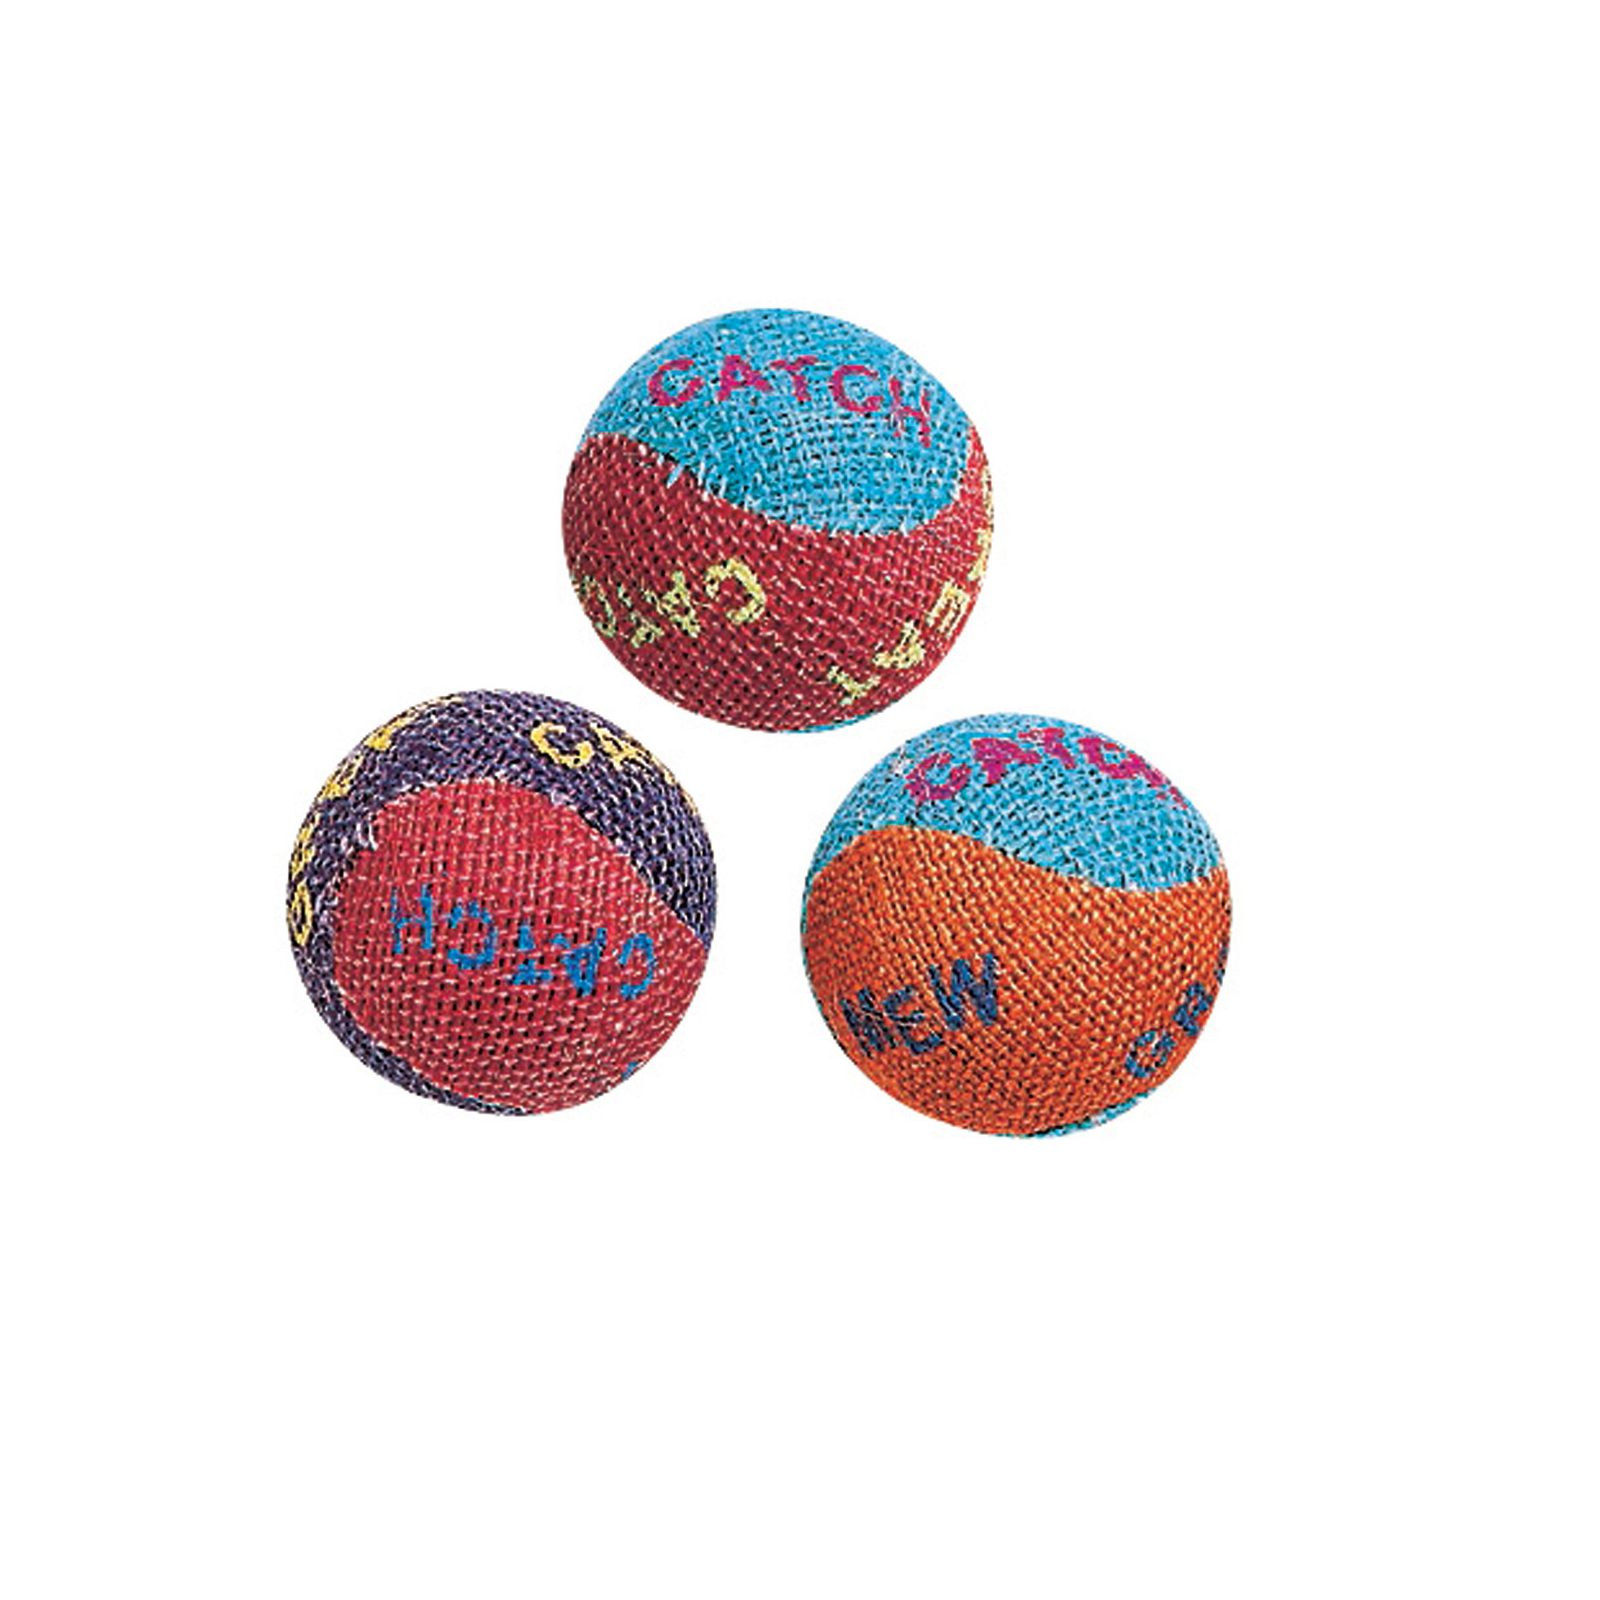 Ethical Products Inc. Toy Burlap Colored Balls 3 pk.